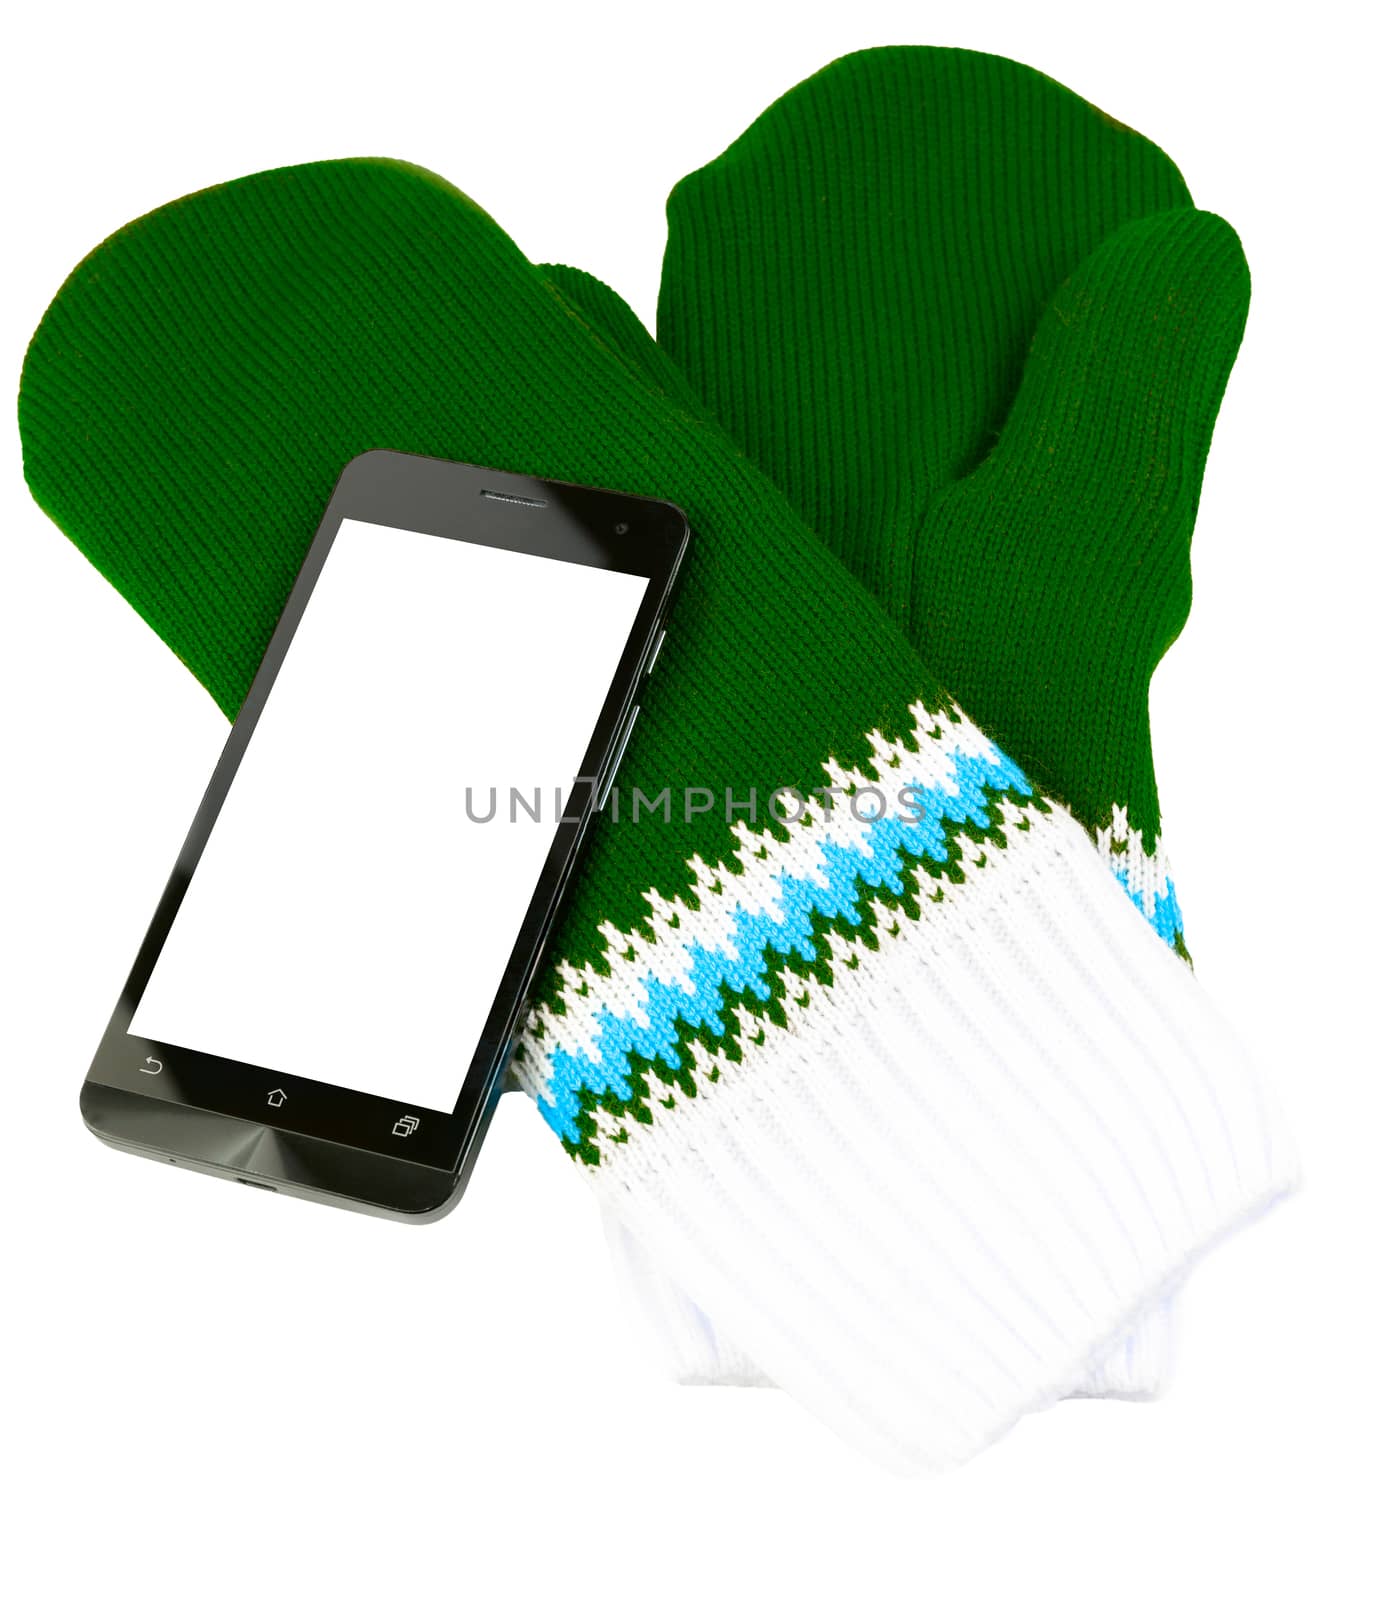 green and white knited mittens with cellphone isolated on white background by z1b